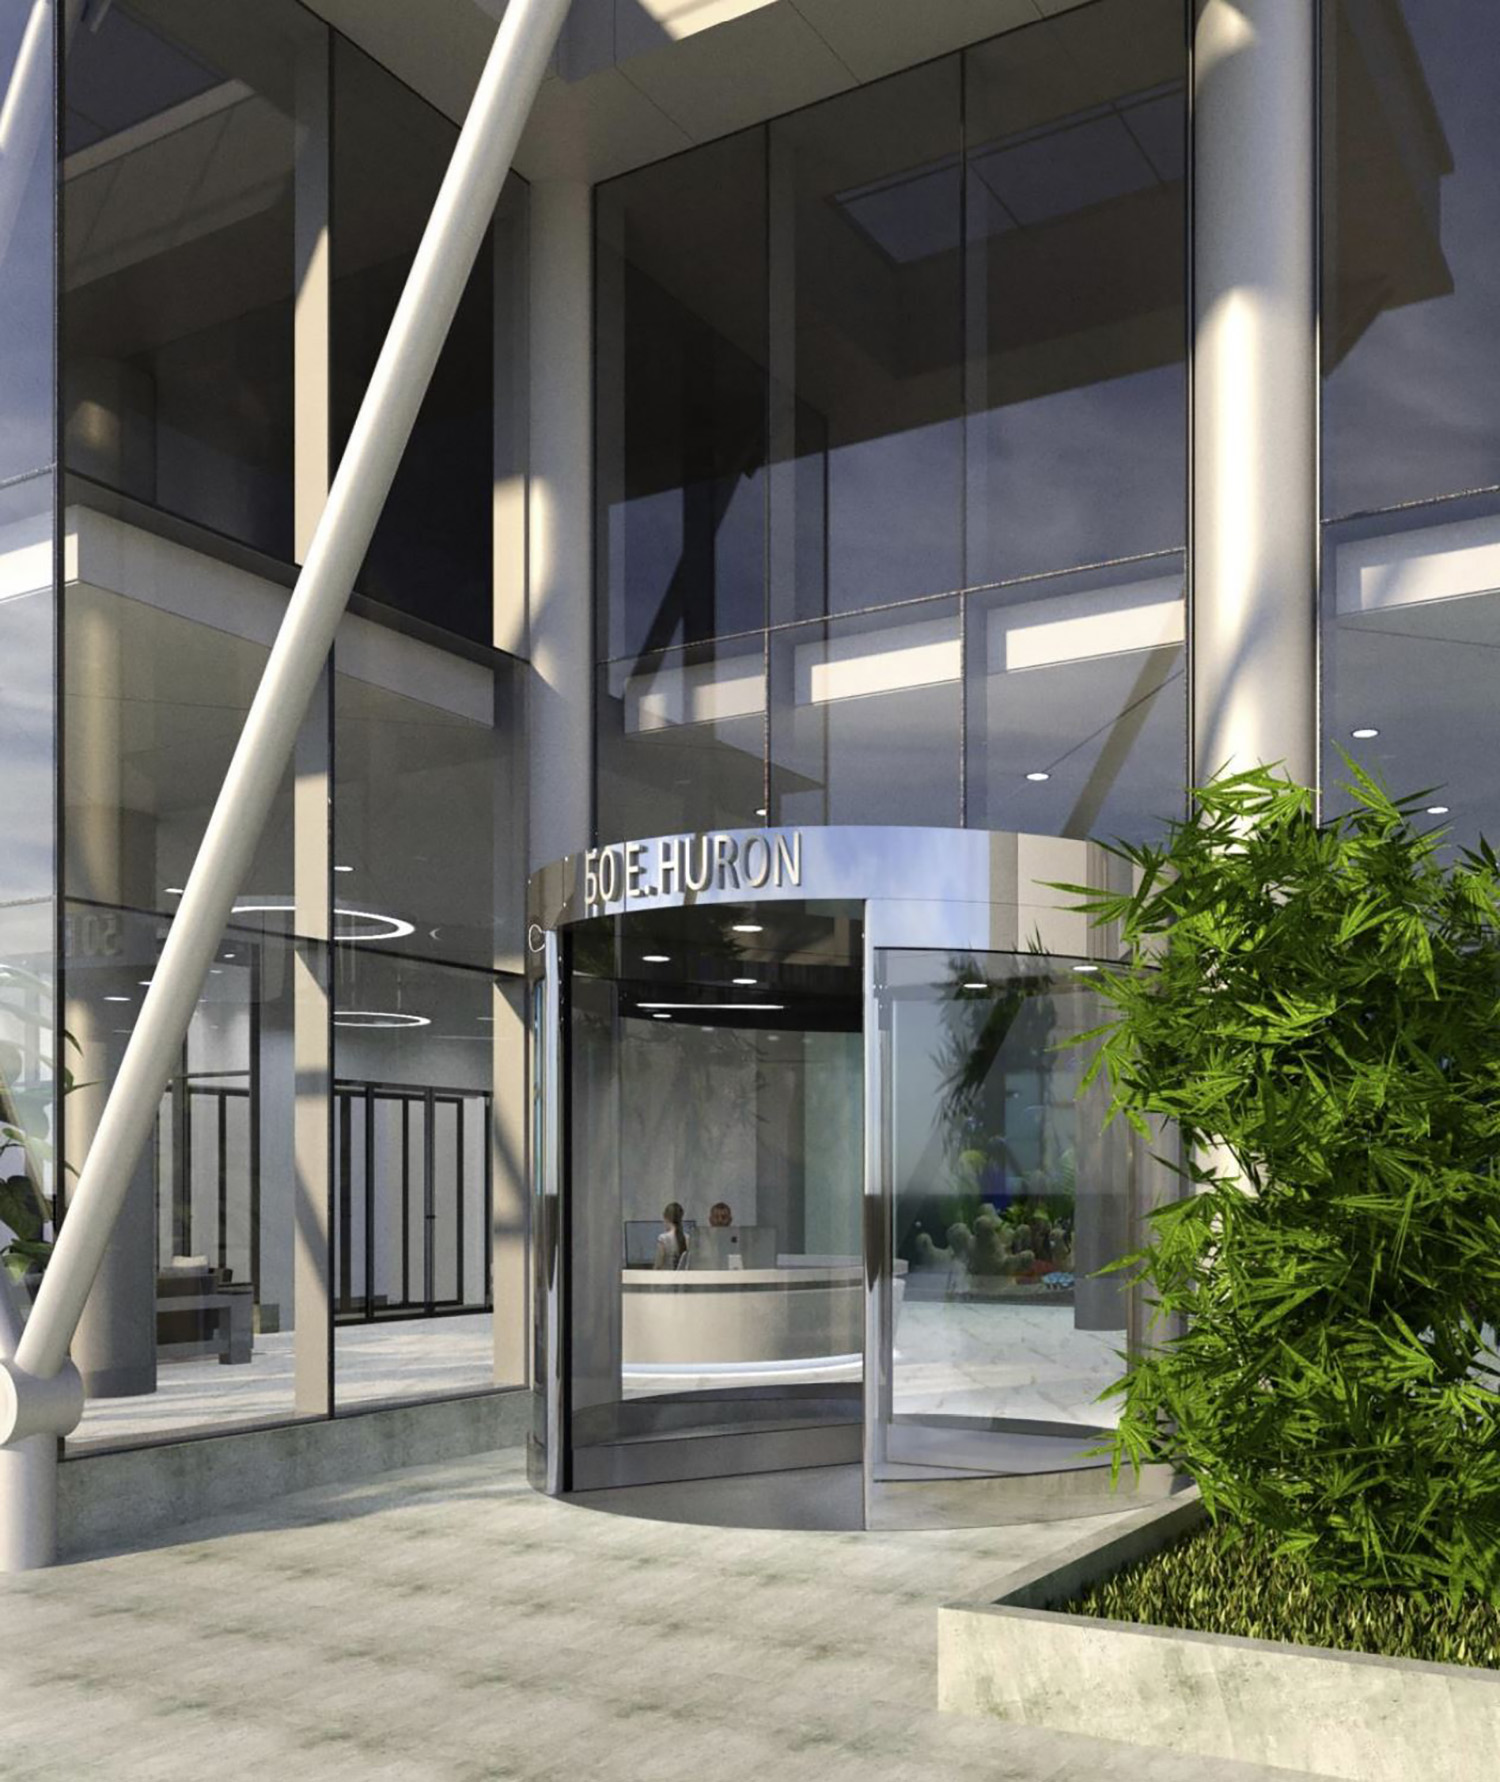 Entrance to 50 E Huron Street. Rendering by Absolute Architecture PC